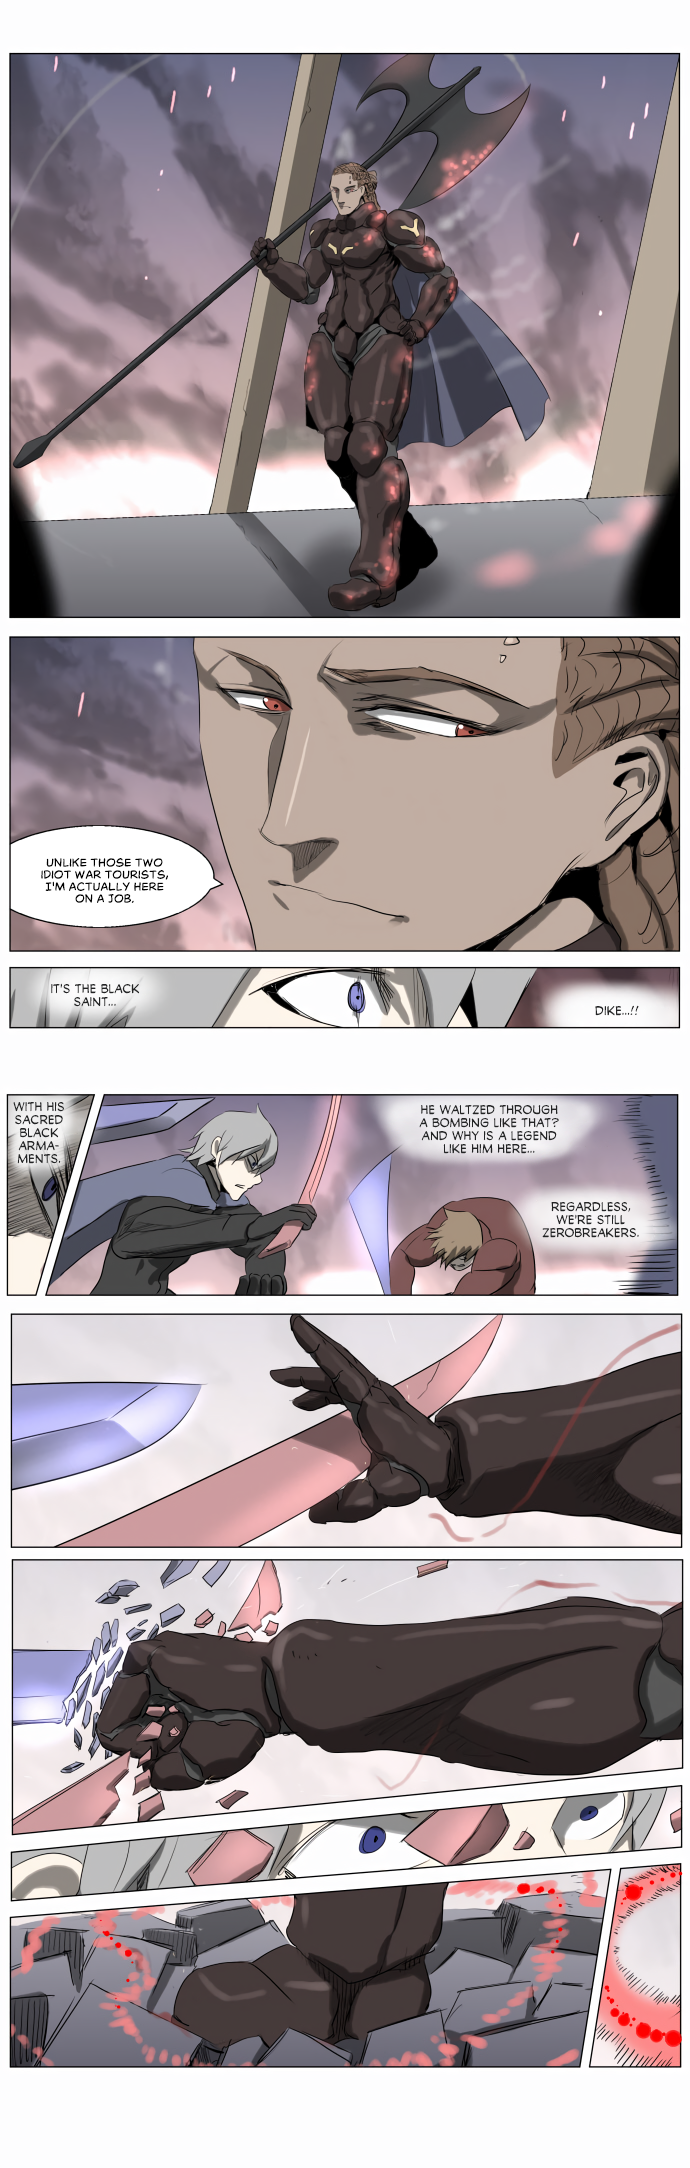 Knight Run Vol.4 Chapter 212: Knight Fall - Part 16 | The Fall - Picture 2